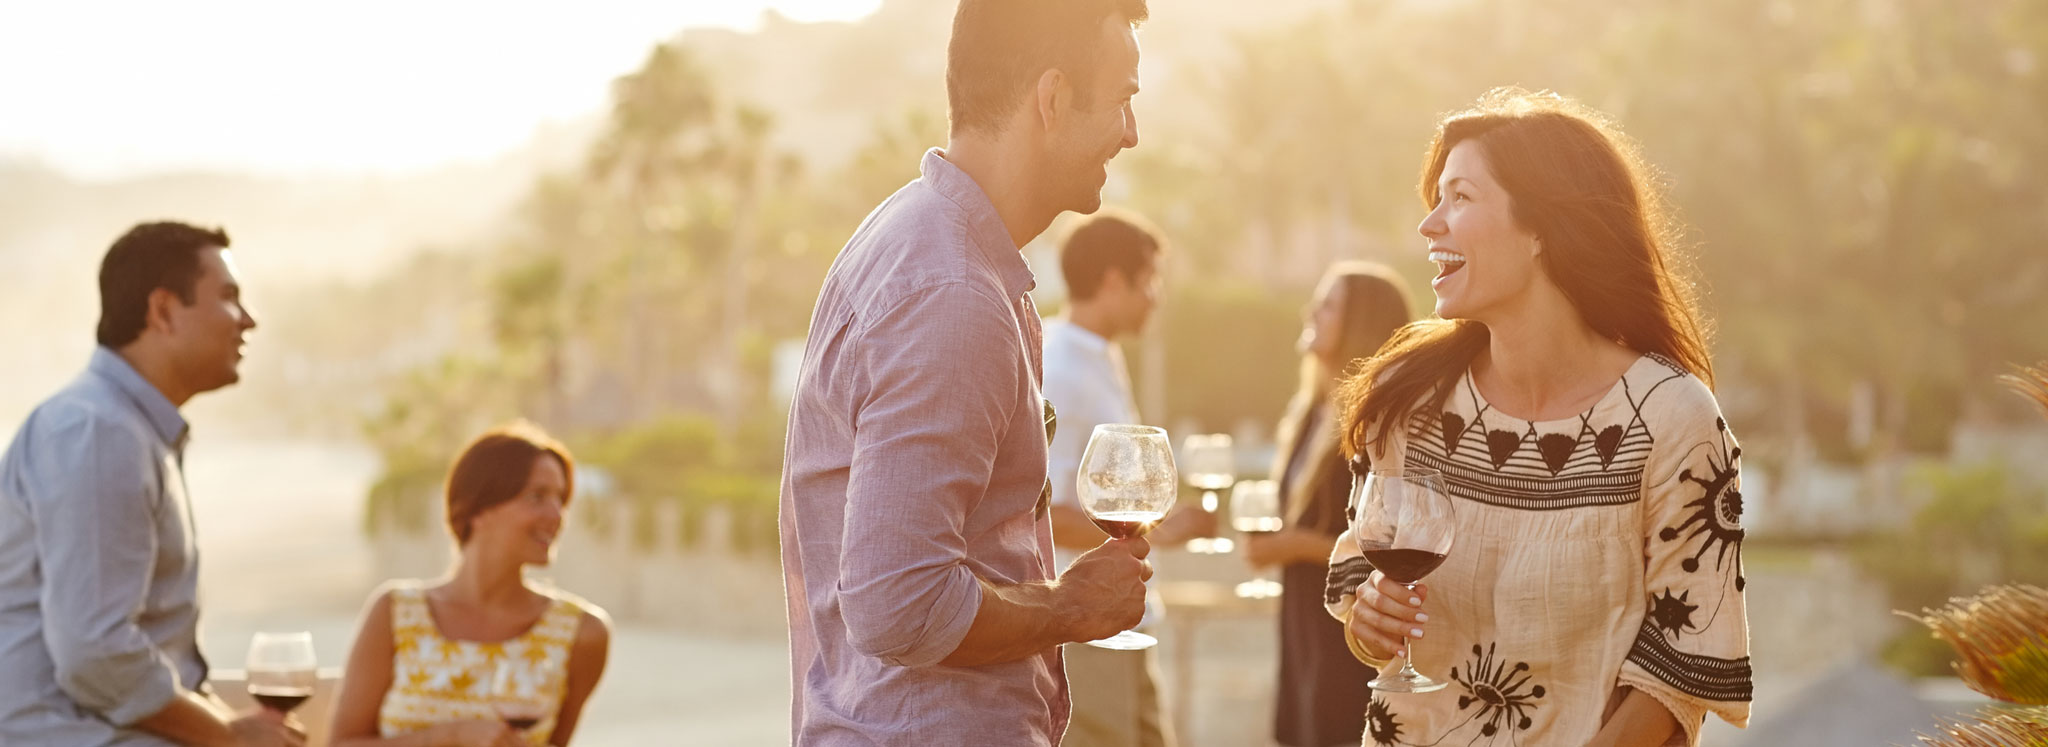 Man and woman laughing while holding glasses of wine